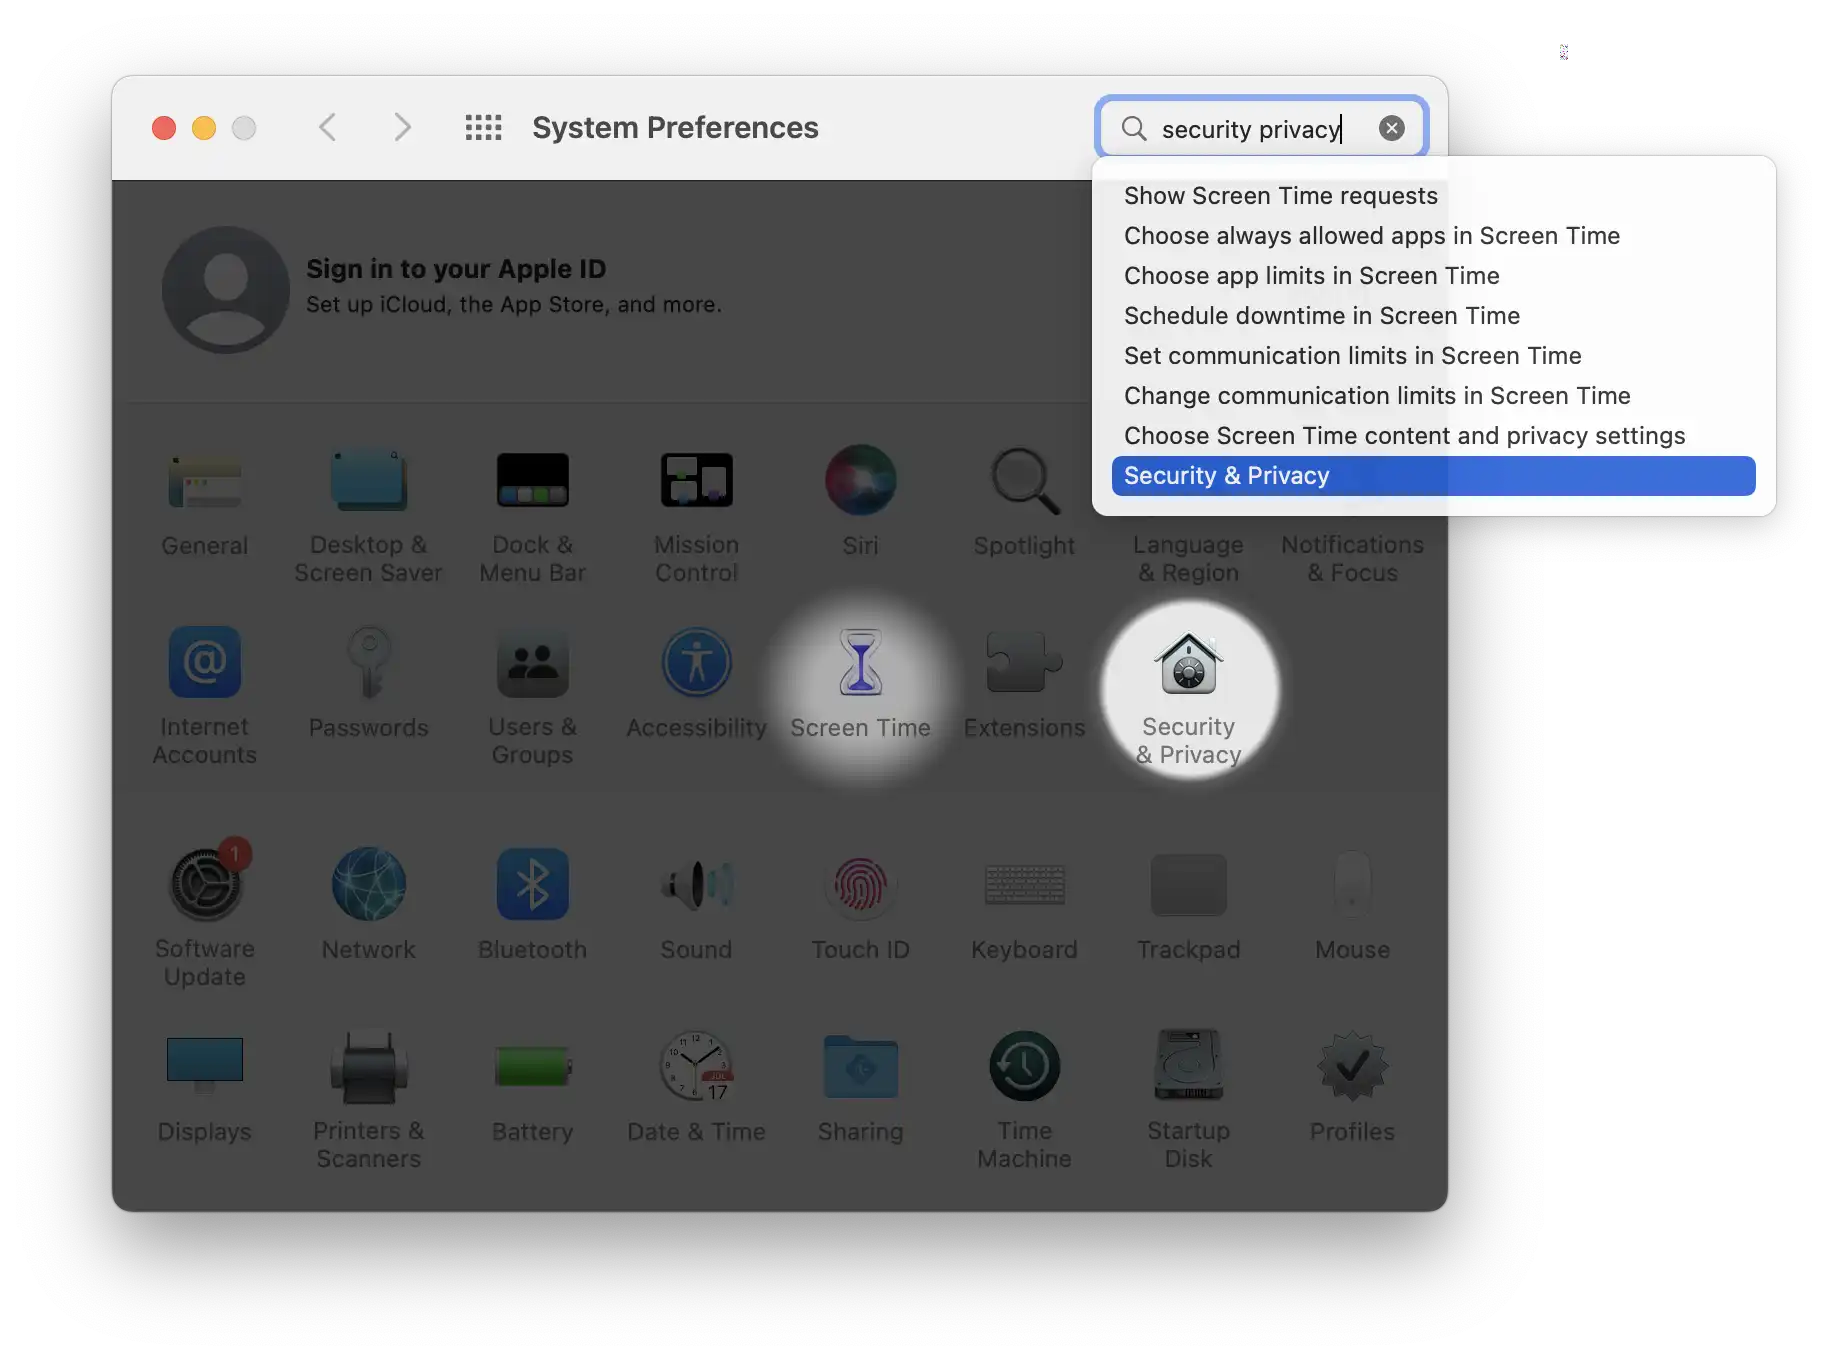 Security and Privacy on System Preferences Window